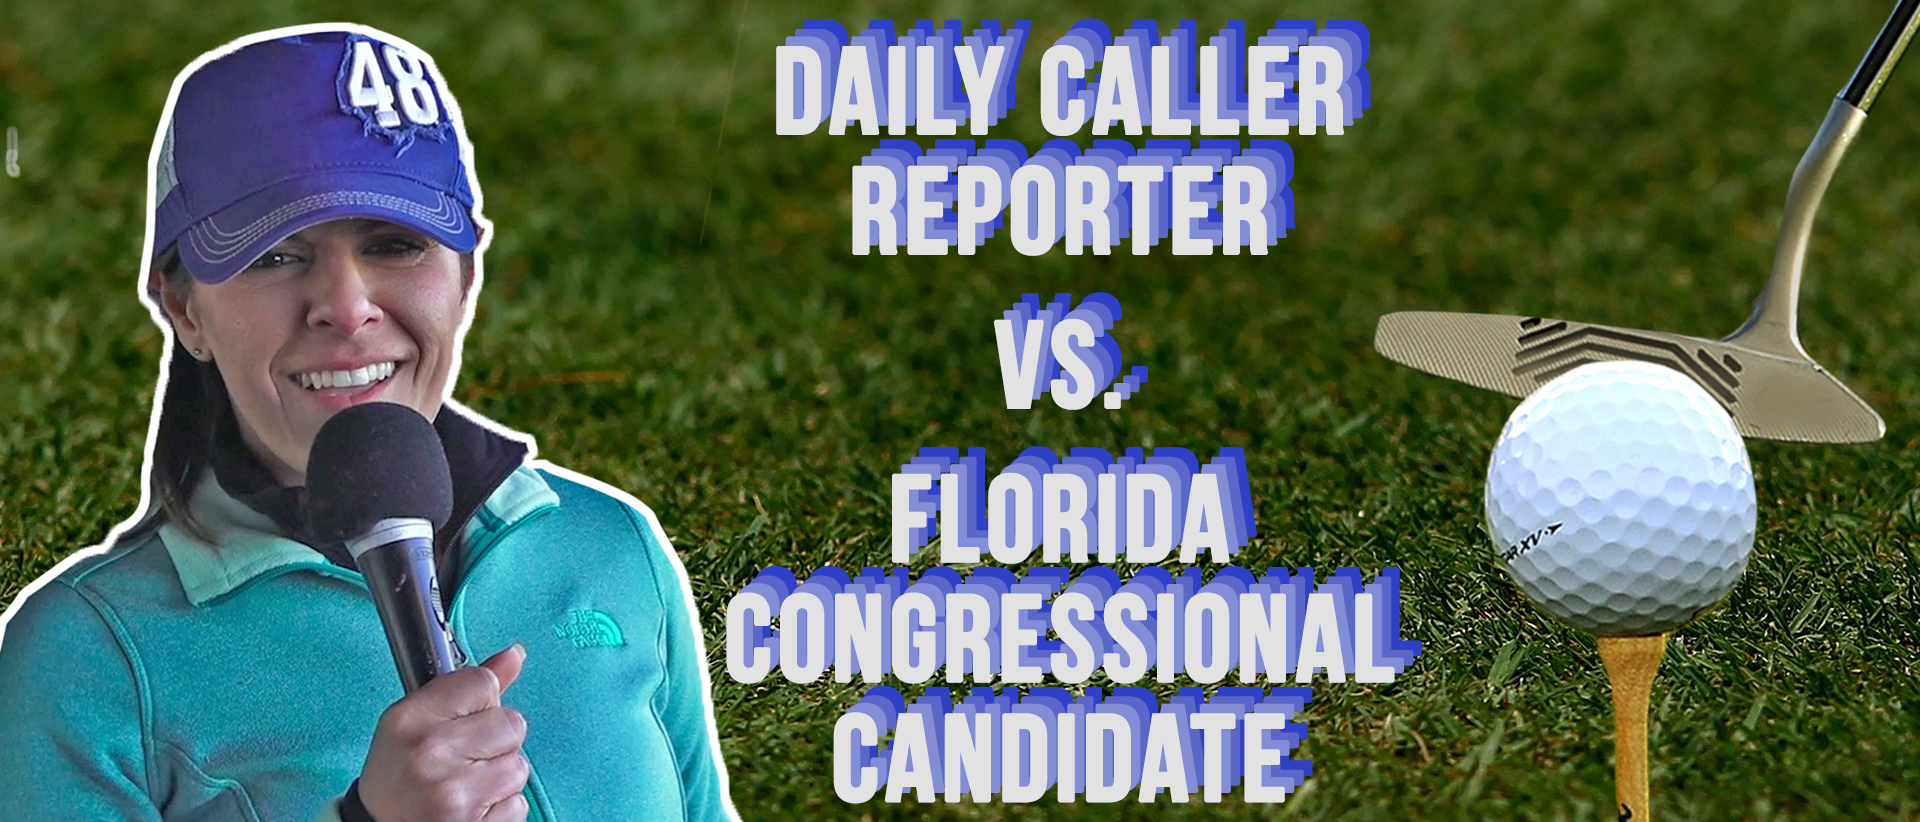 Daily Caller Reporter VS. Florida Congressional Candidate | The Daily Caller1920 x 822